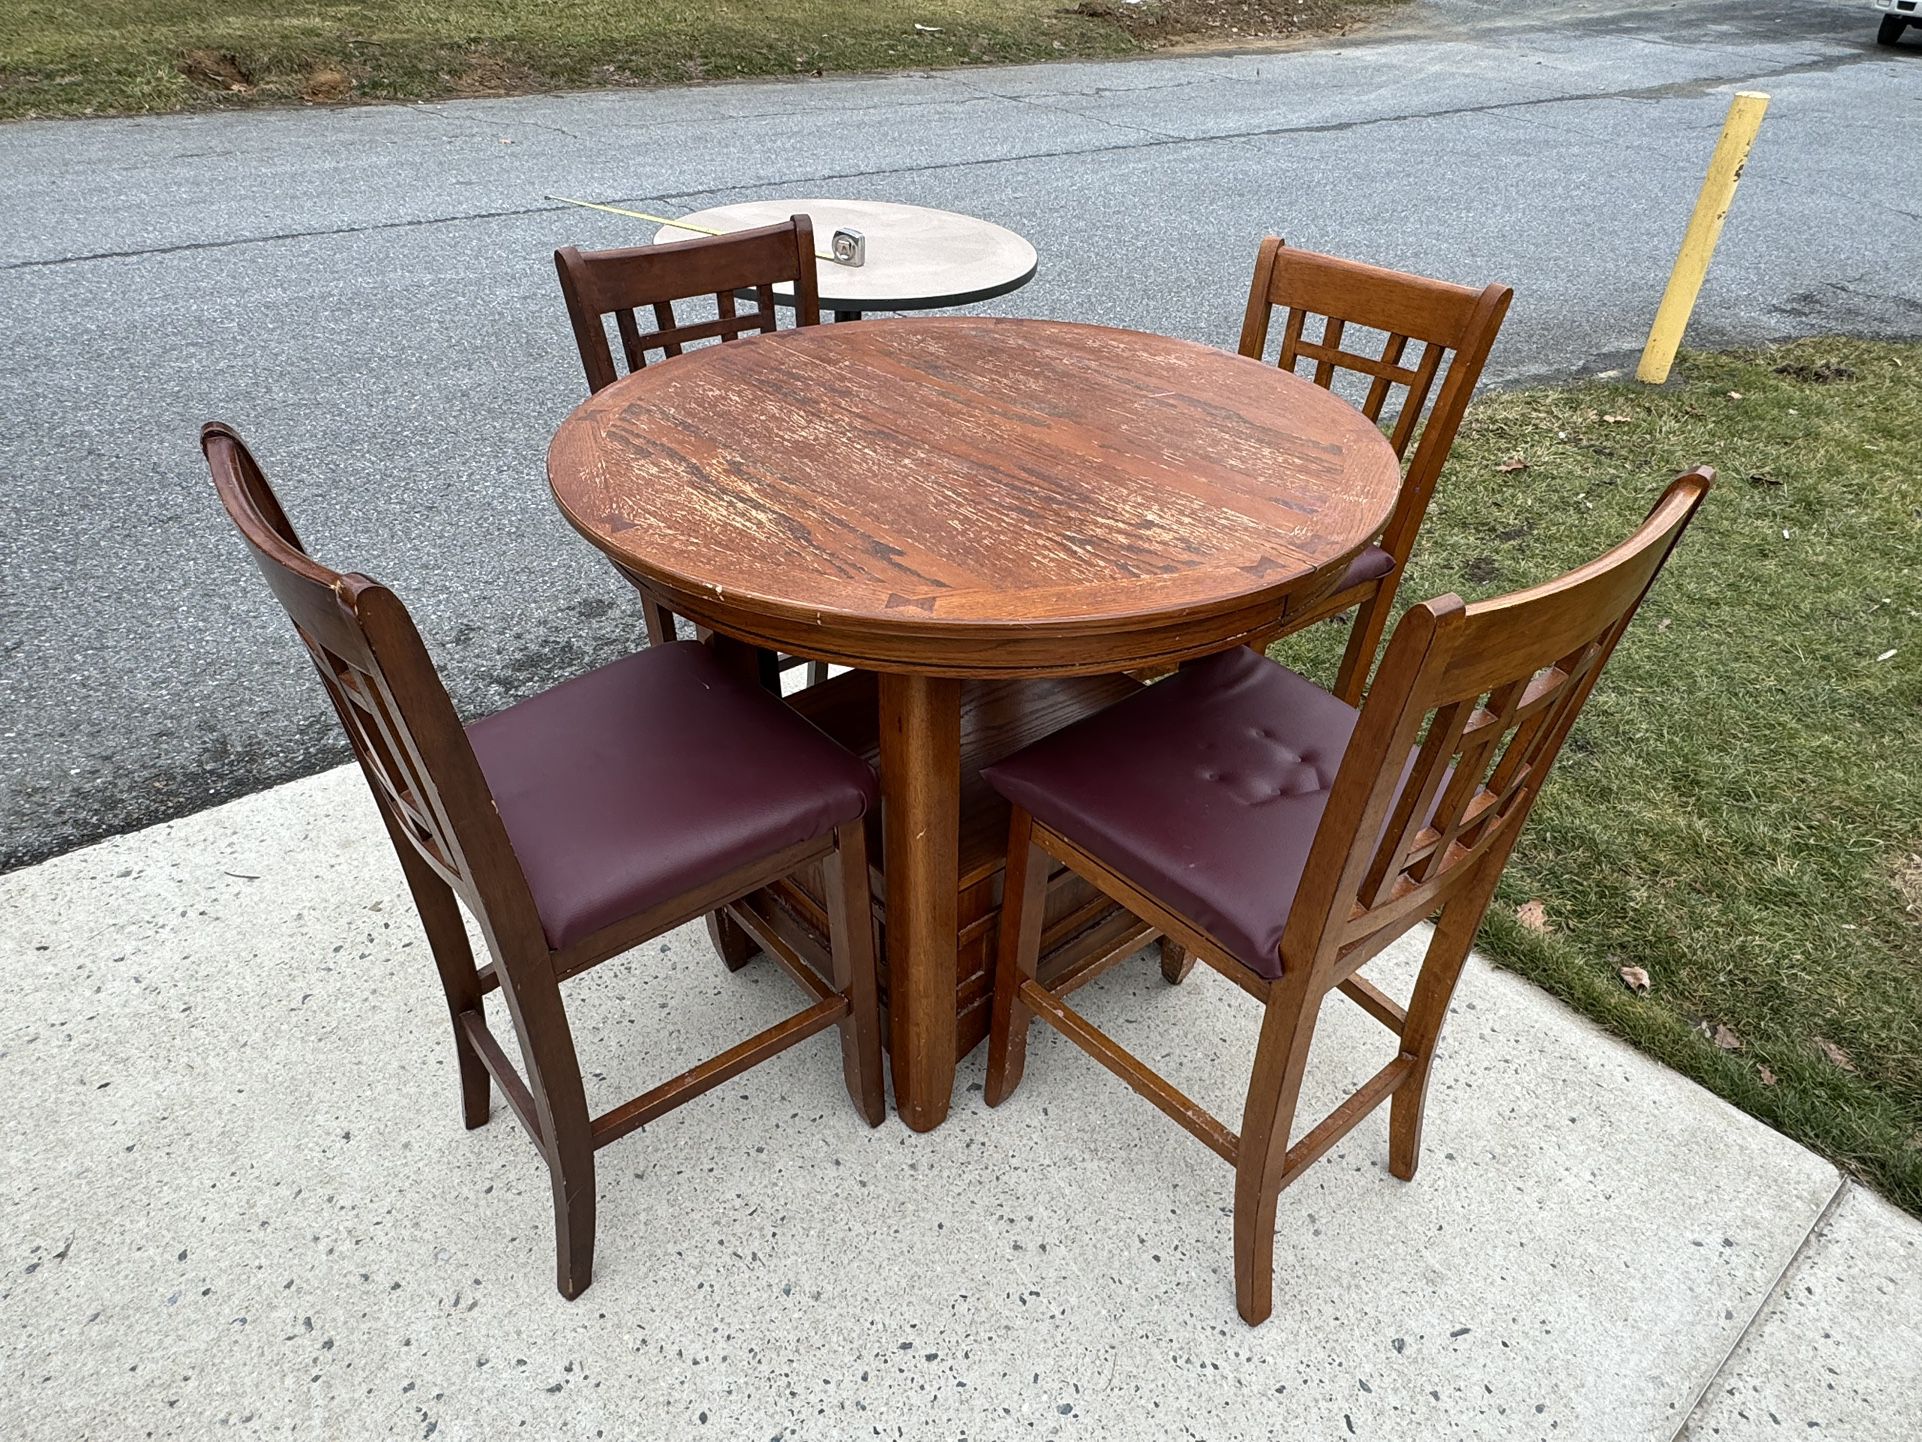 Counter Height Dining Table w/ 4 Stools - Read Description - Marietta, Pa Pick Up